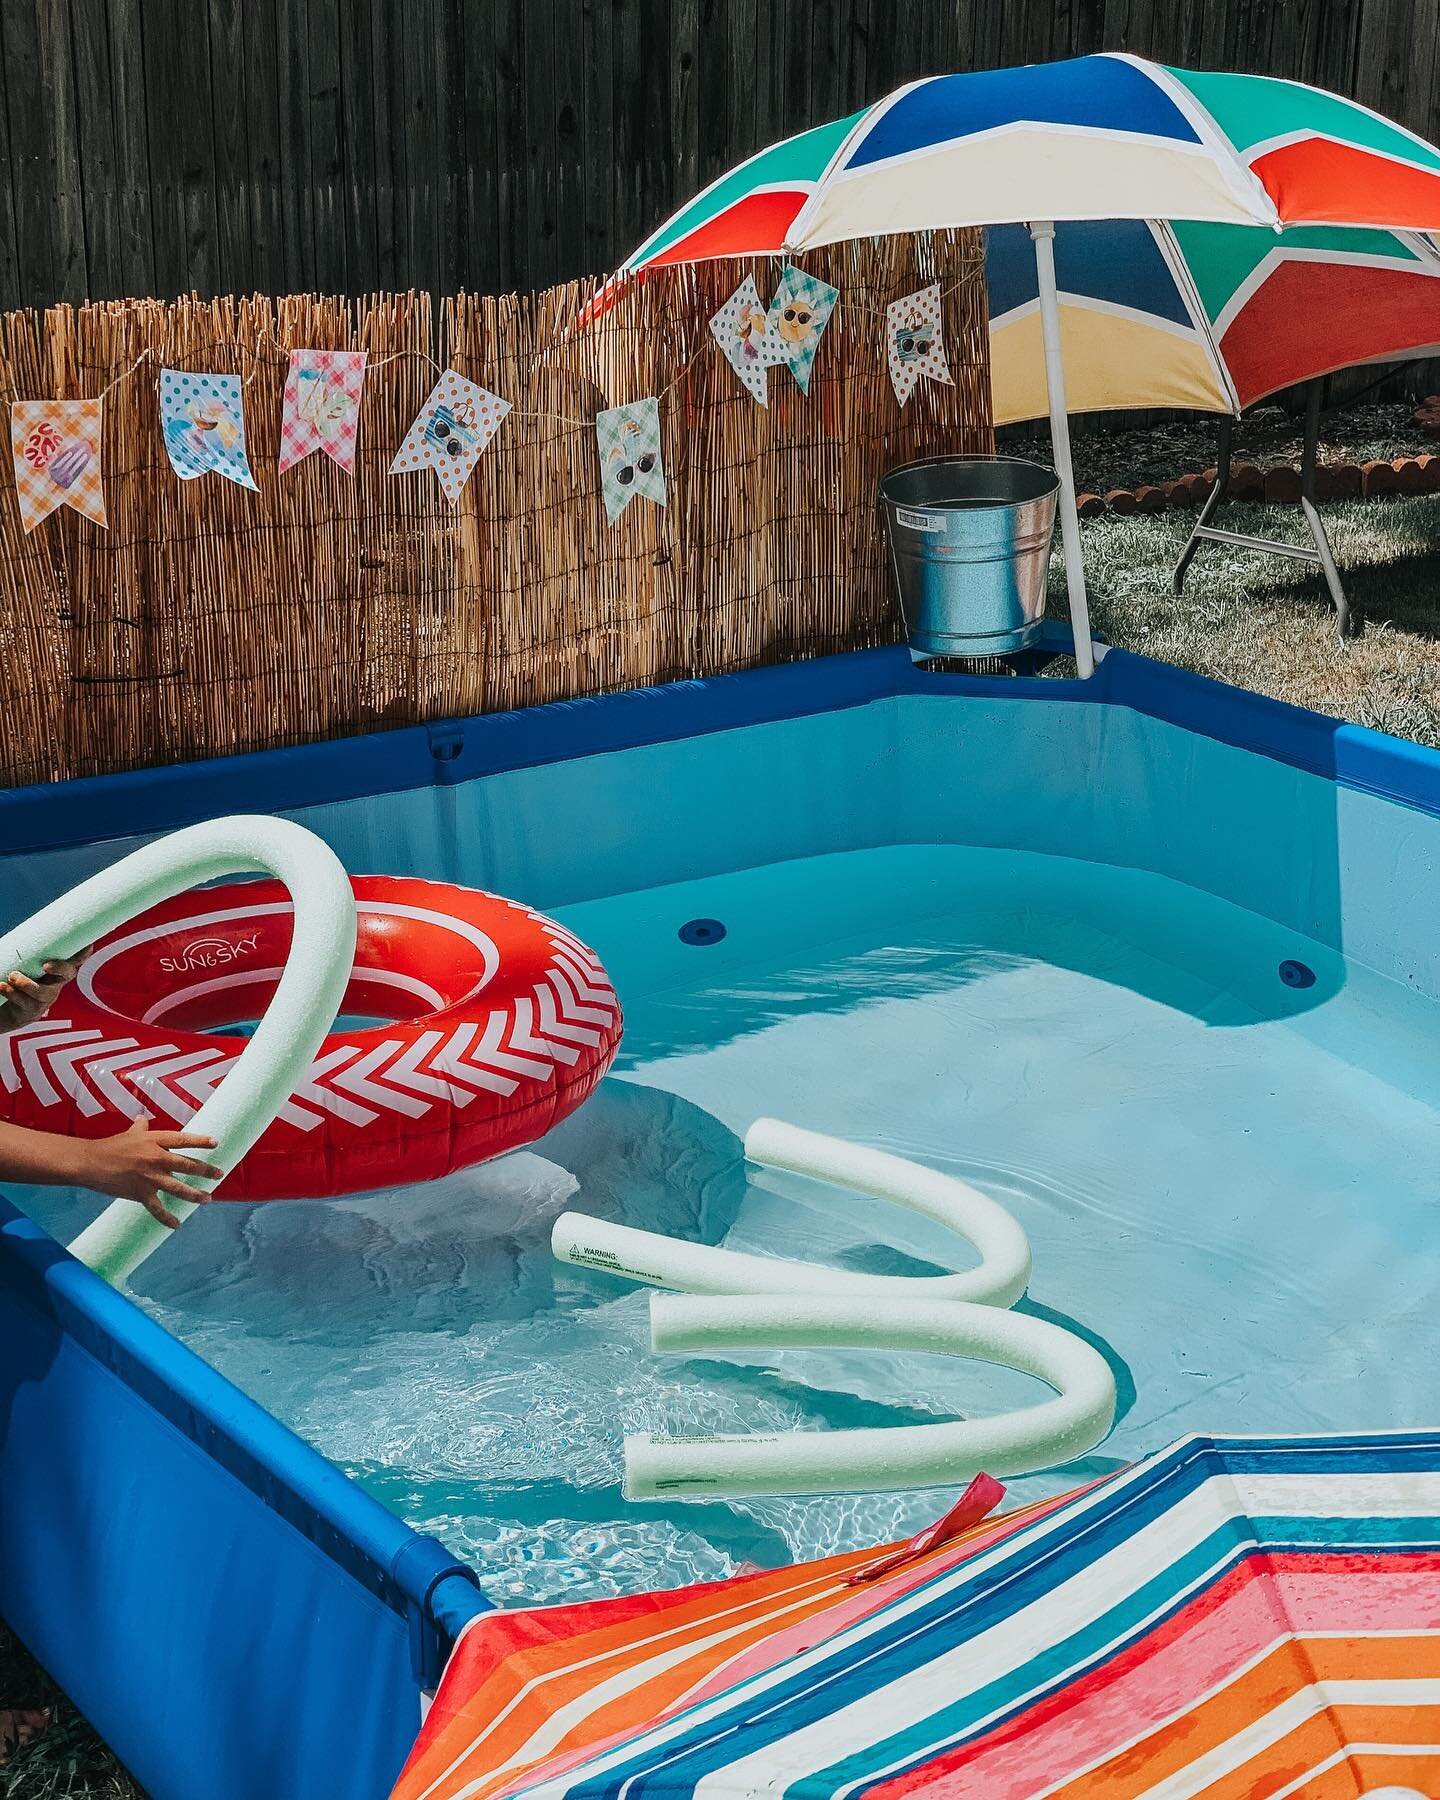 The best backyard 4th of July&hellip; 🇺🇸
⠀⠀⠀⠀⠀⠀⠀⠀⠀
We are on the last day of #3daystohost , and this is always my favorite day: family fun and traditions. What do we do?? Create a backyard water park! Set everything up the night before or the morni